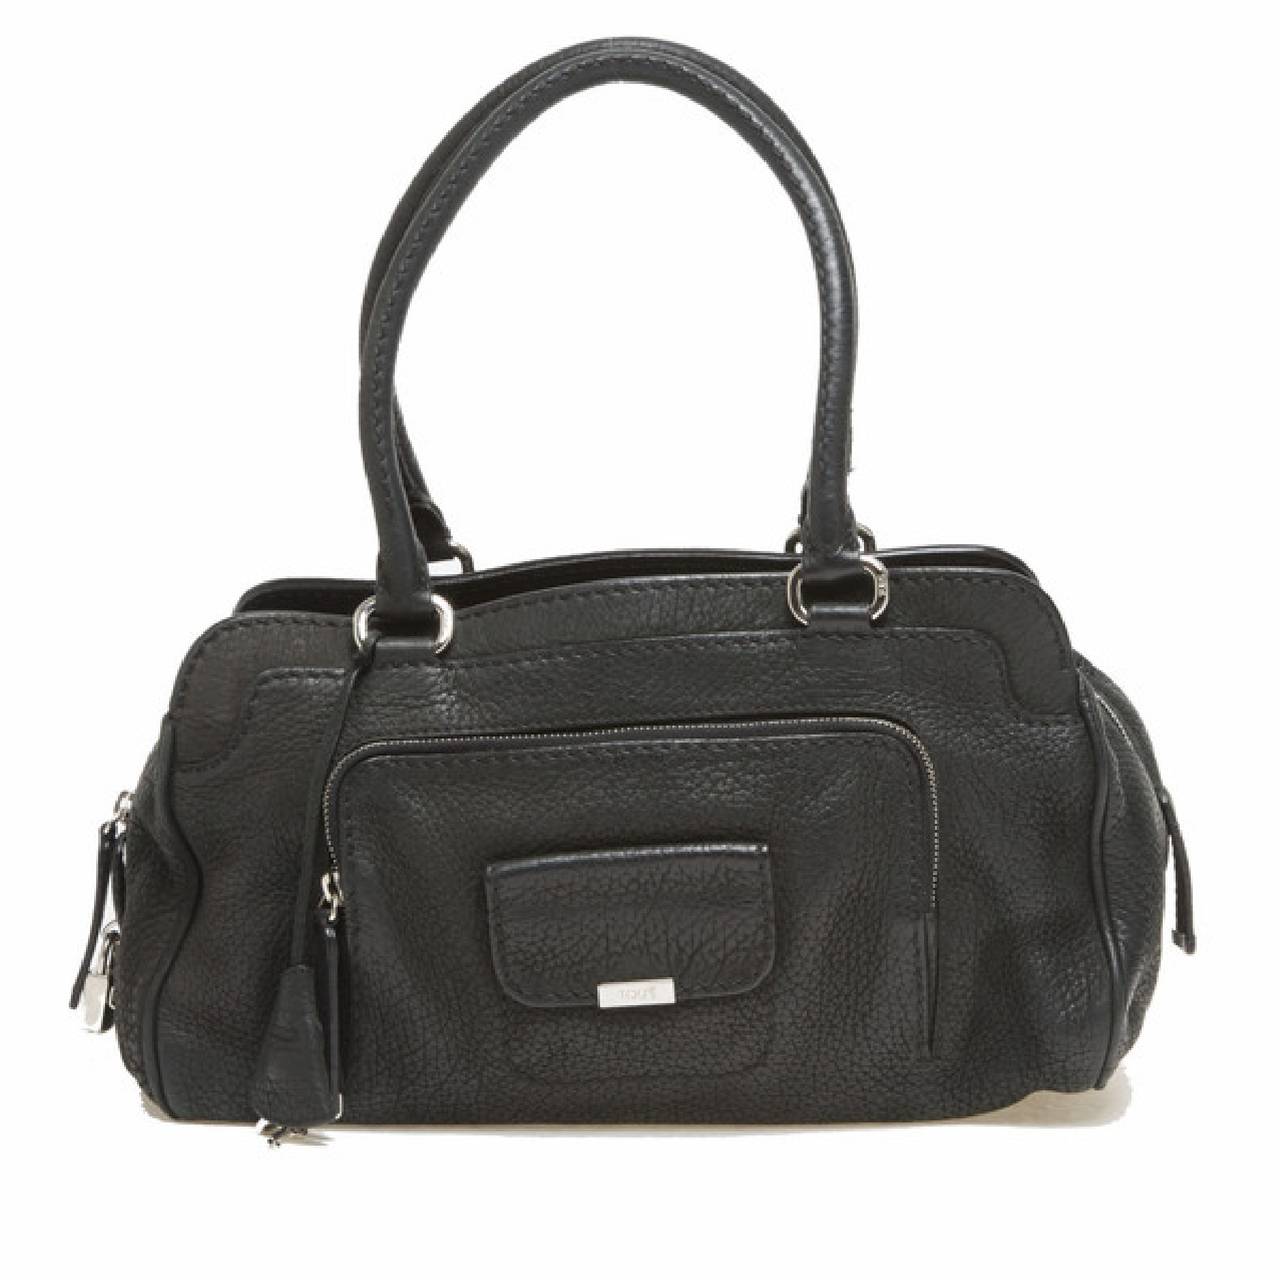 This authentic Tod's Top Handle Front Pocket bag is constructed in soft black pebbled leather. The bag features various pockets on the exterior, a half-zip and snap button closure pocket on the front flap. An easy, roomy satchel with dual rolled